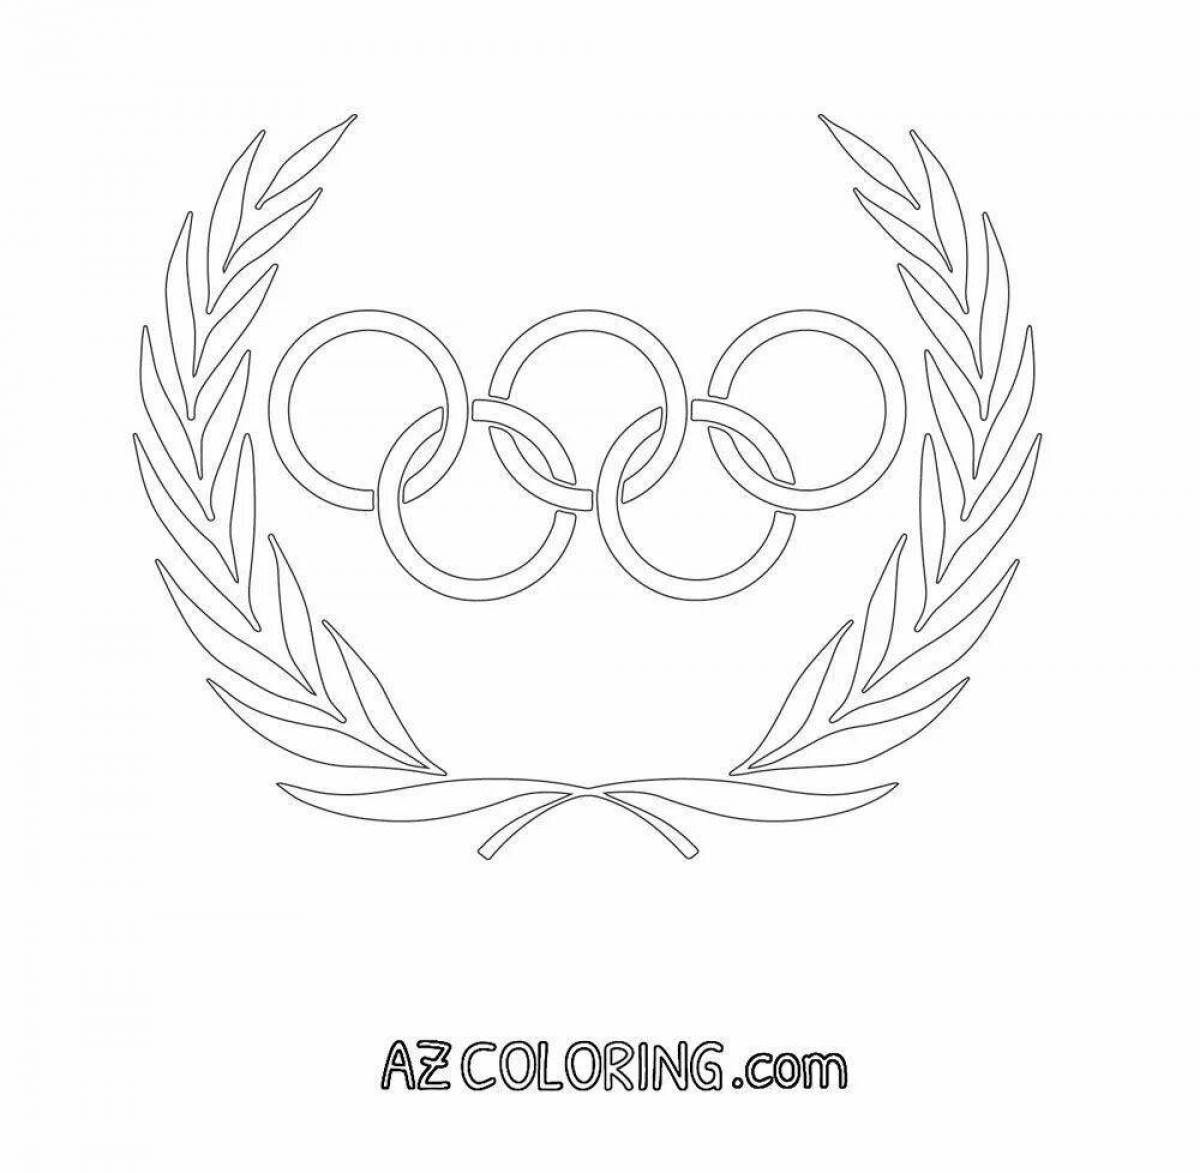 The exciting coloring of the Olympic flag